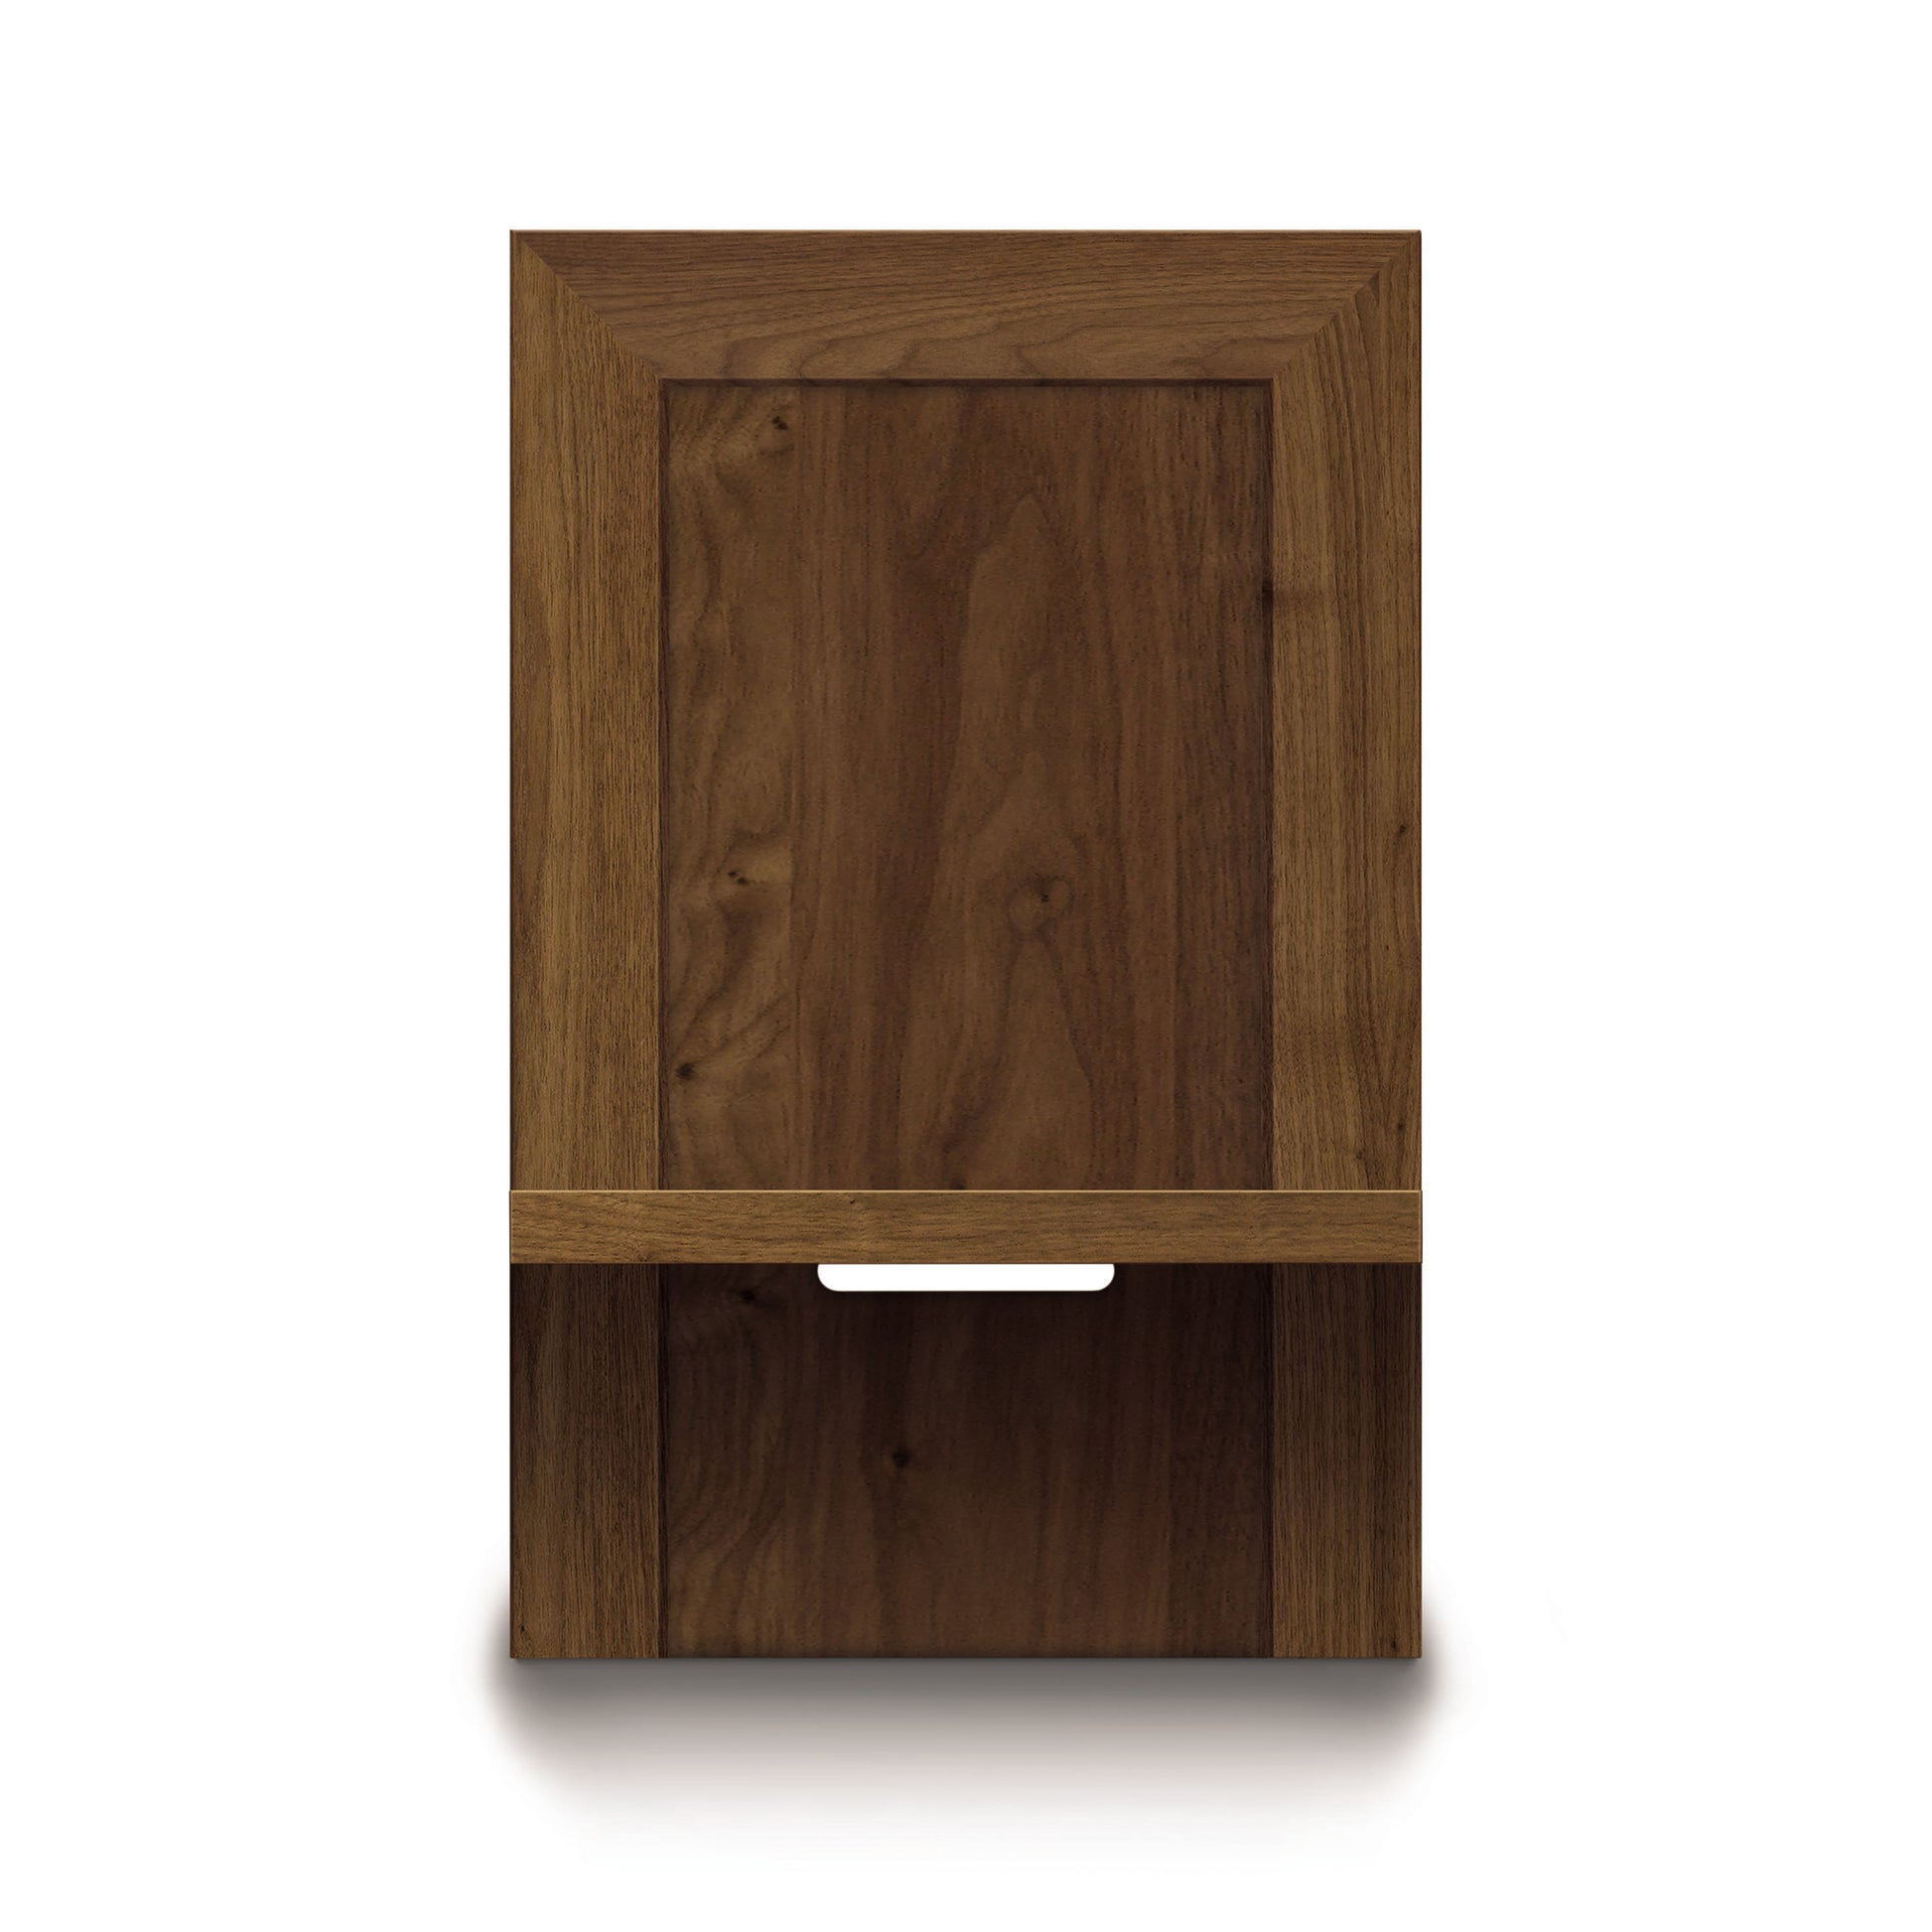 A single wooden cabinet door from the Copeland Furniture Moduluxe Attached Nightstand with Shelf - 29" Series, with a metal handle, isolated on a white background.